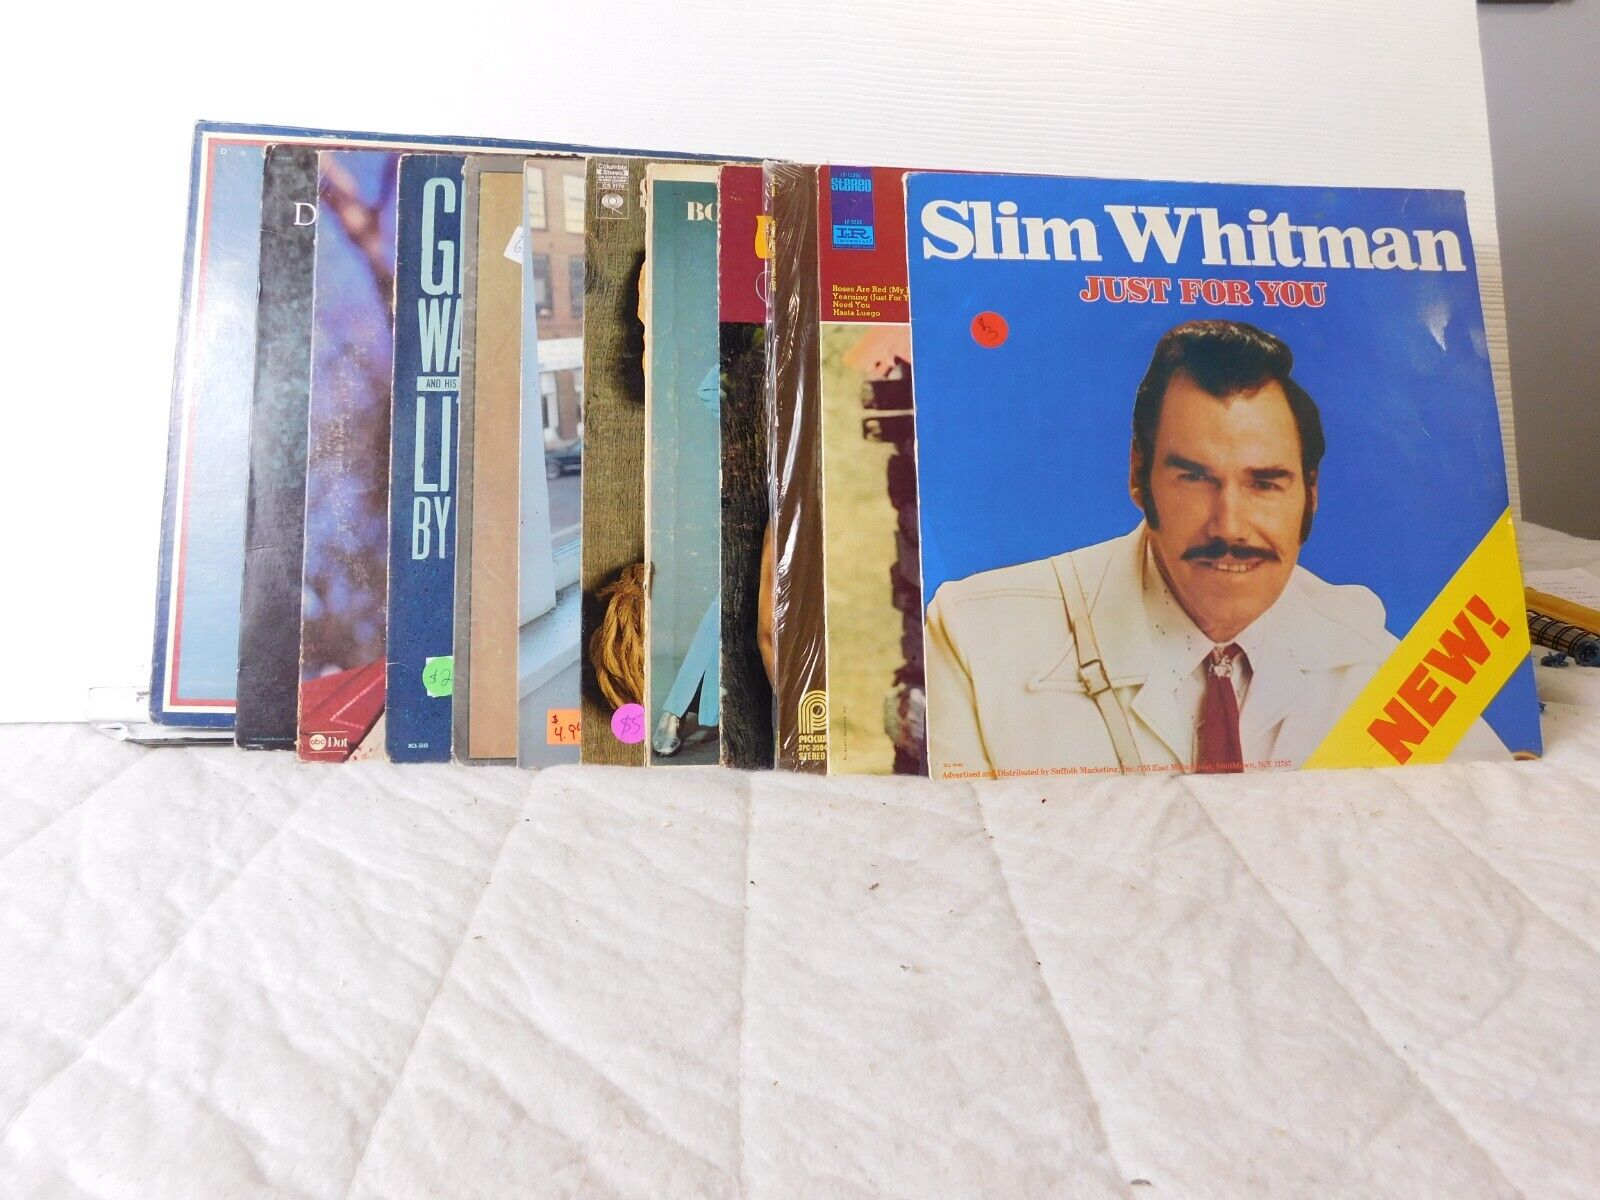 LOT OF 12 VINTAGE COUNTRY ARTISTS-SLIM WHITMAN,DON HUGHES VINYL LPS   ACM